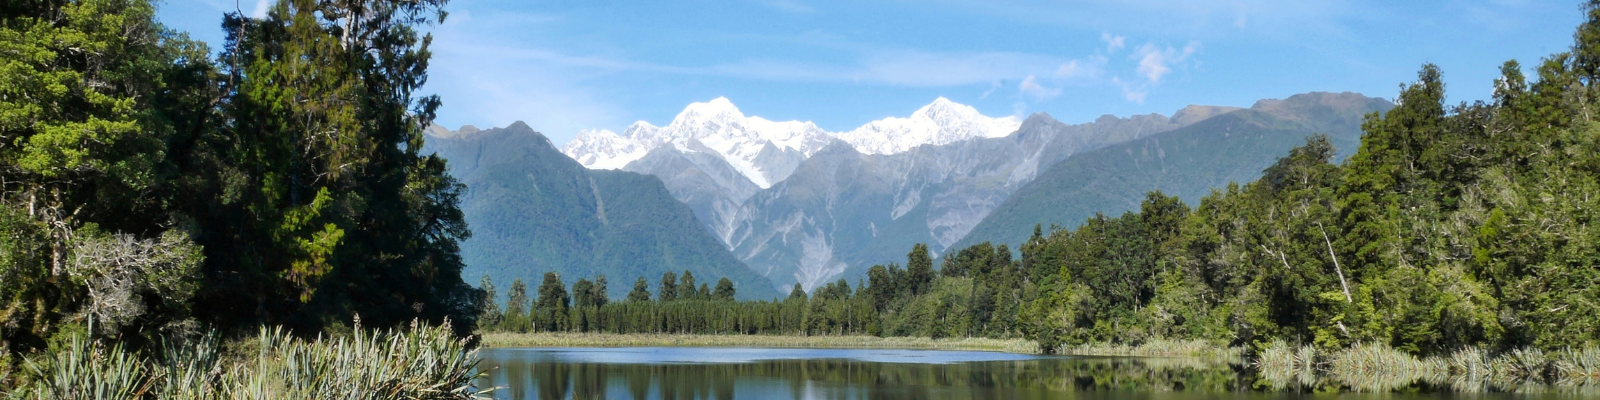 New Zealand landscape - lake surrounded by trees with mountains in the background